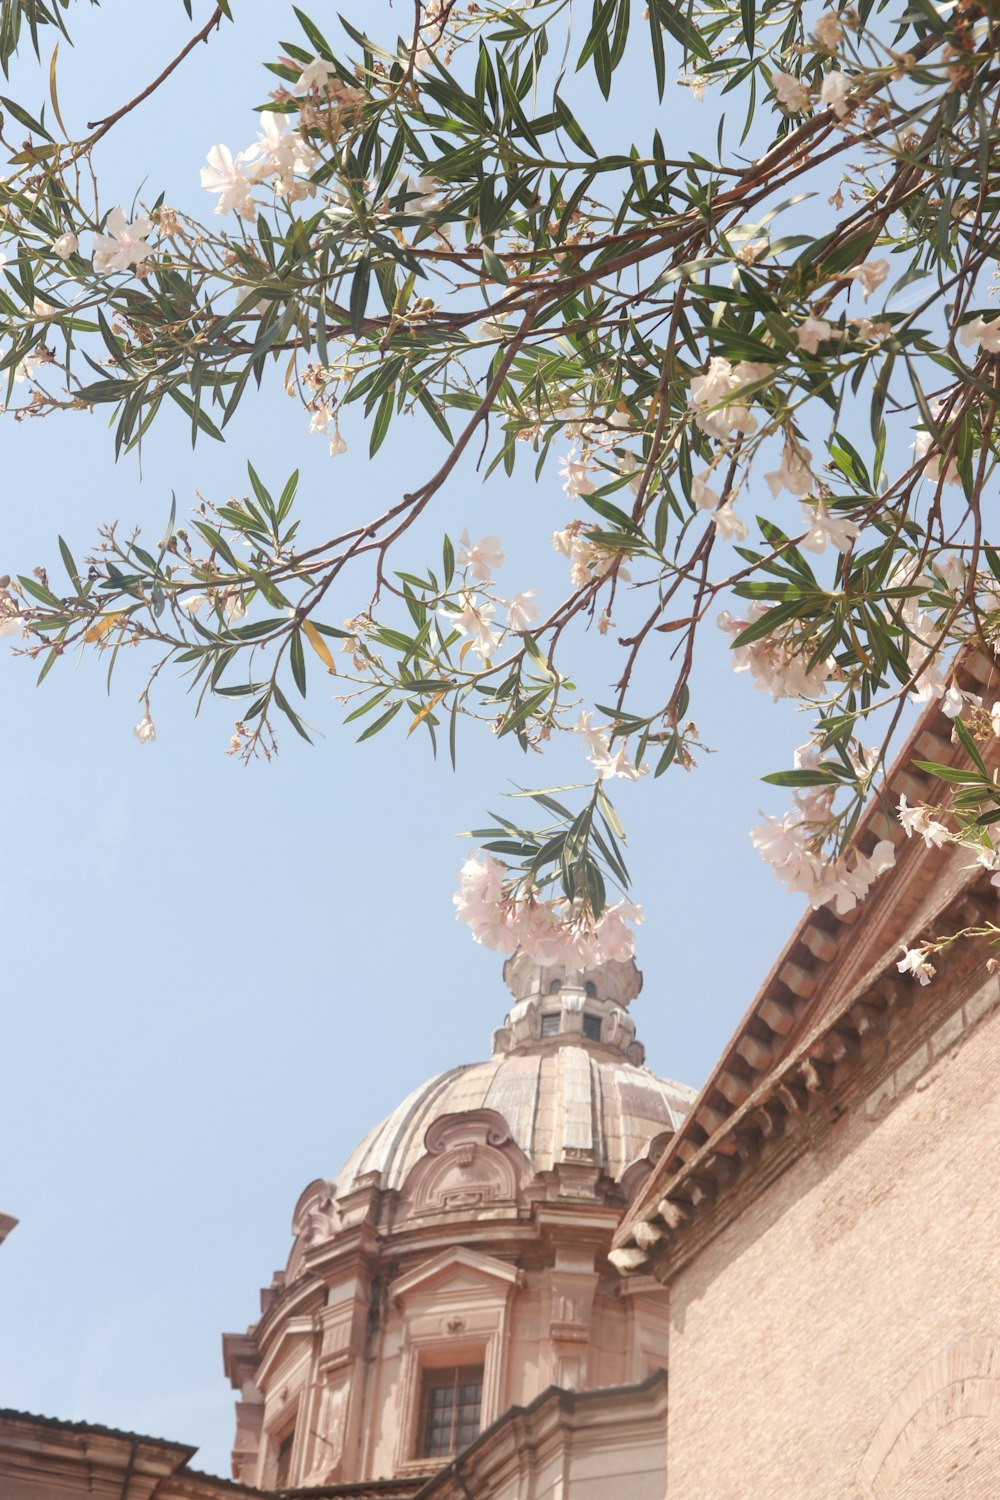 a building with a dome and a tree with white flowers